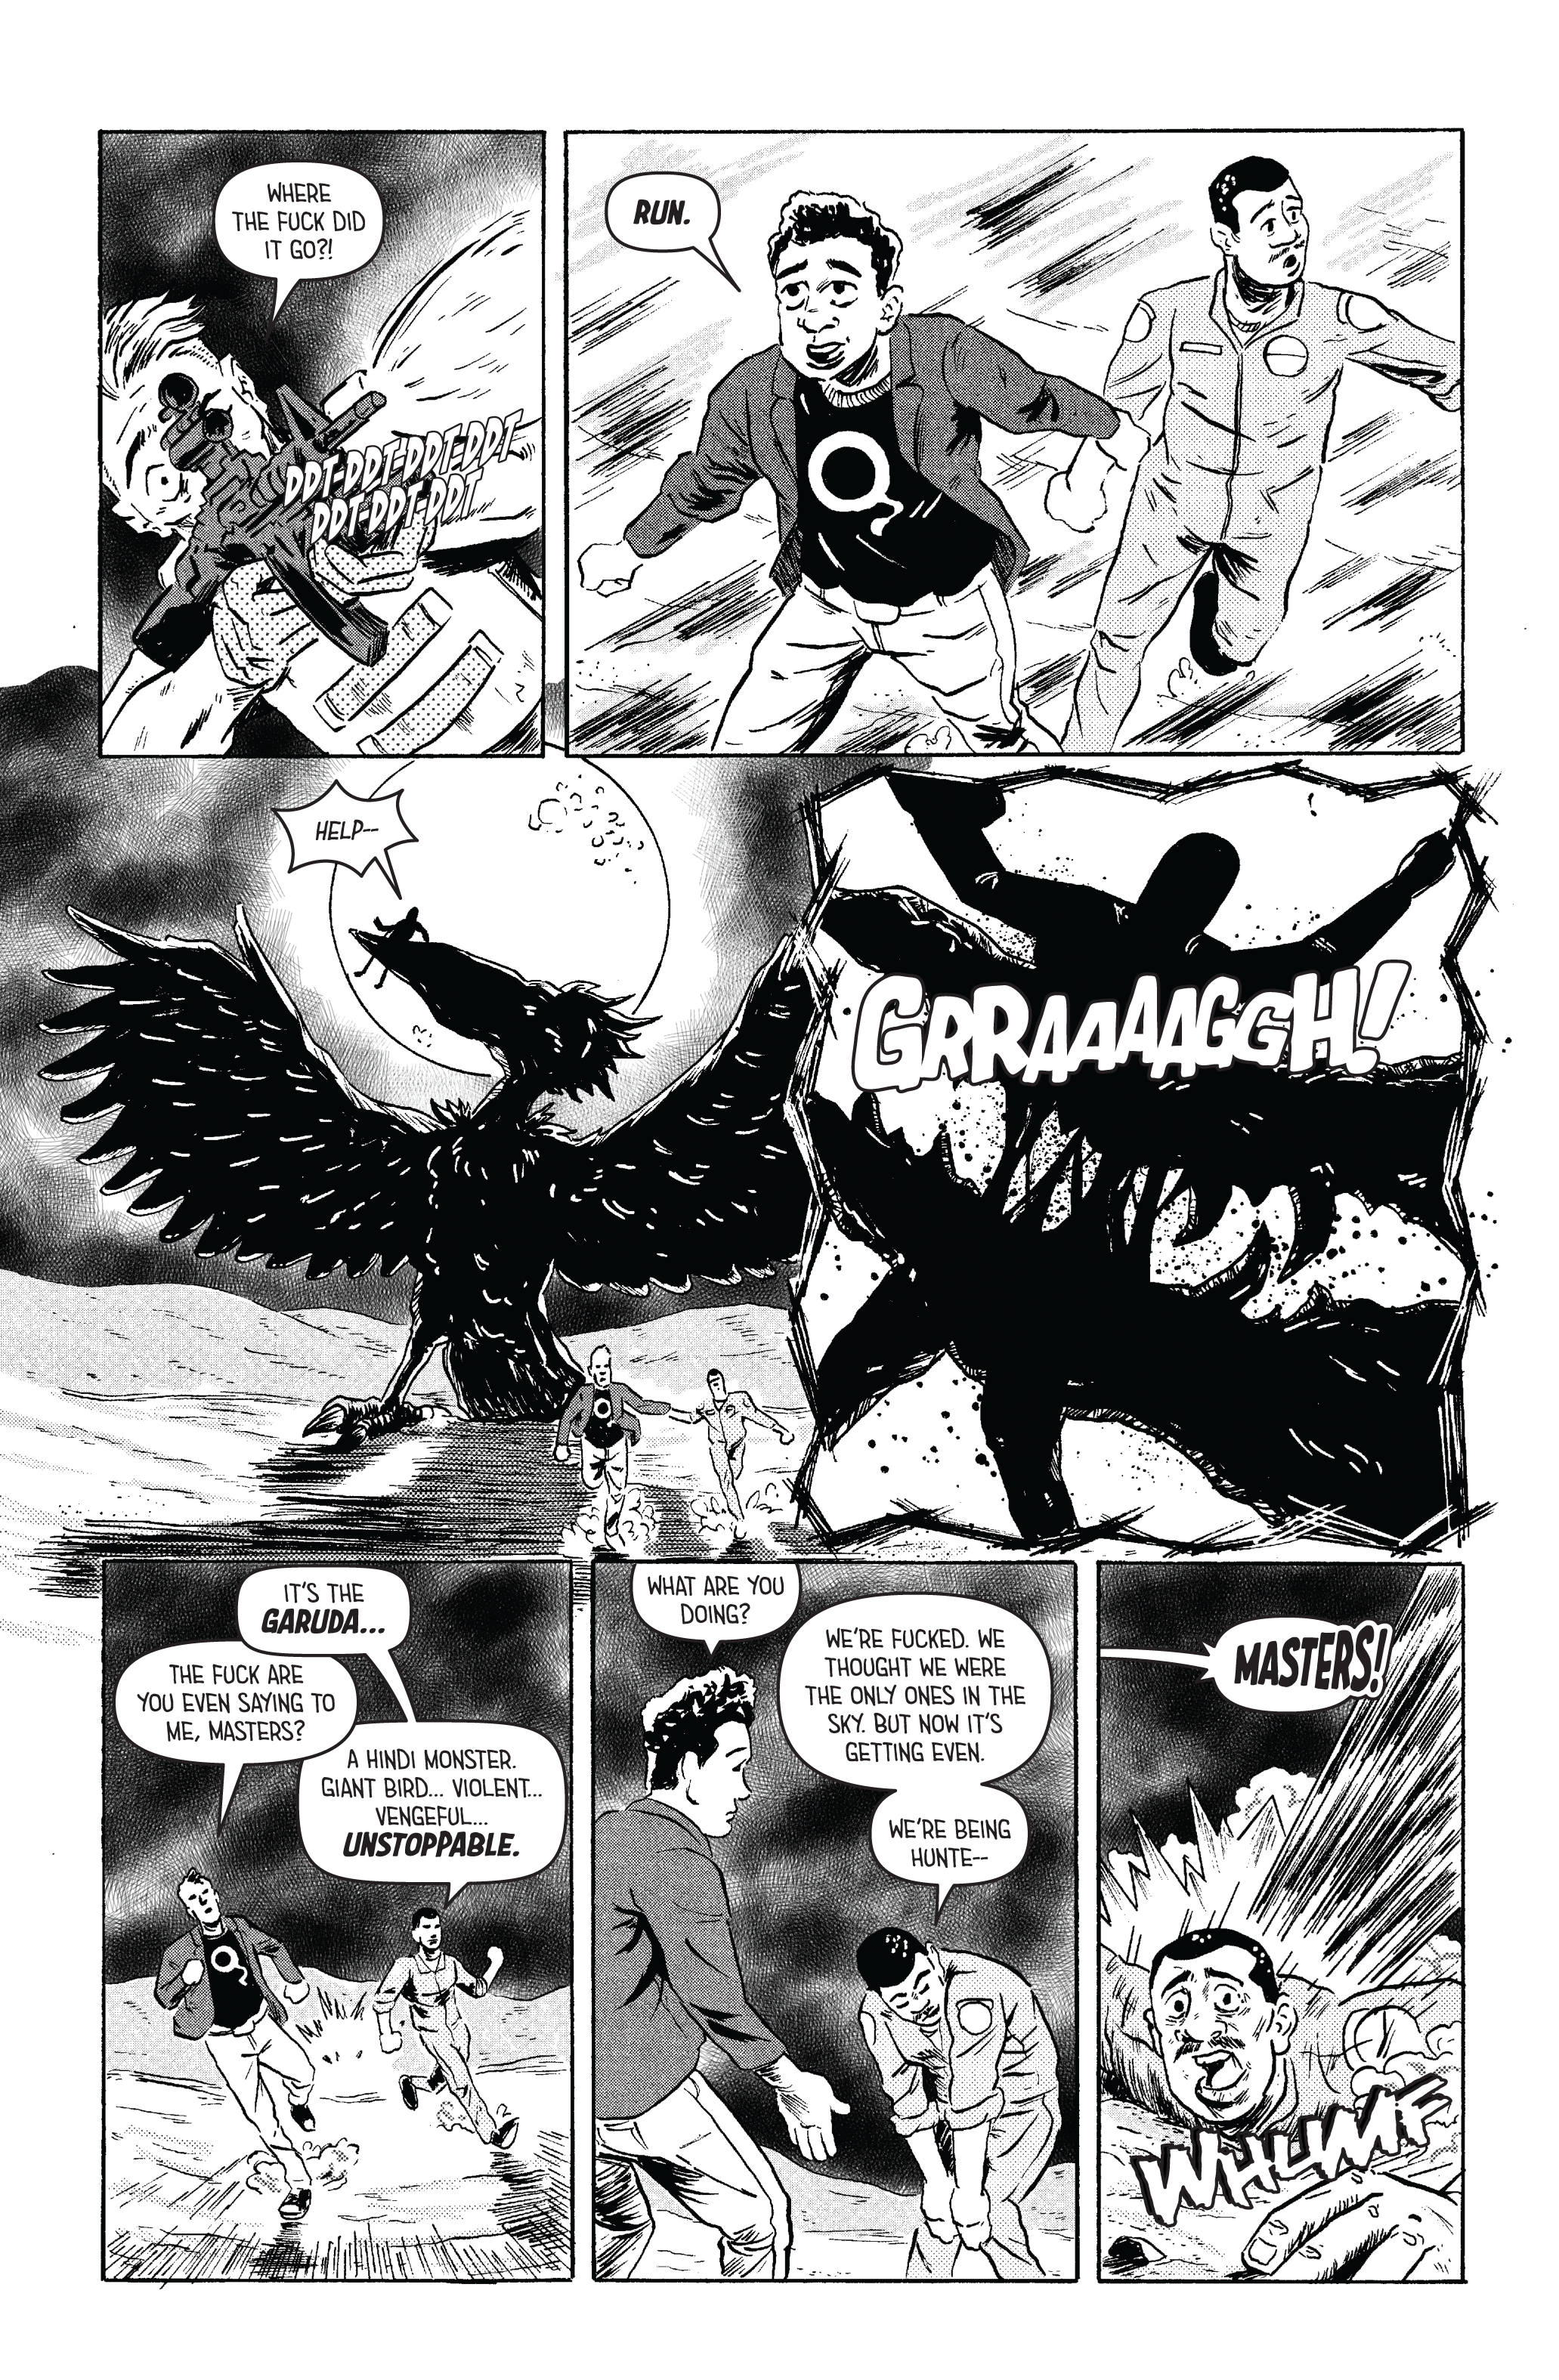 MONOCUL 02 pg 15 Death From Above pg 06-01.png